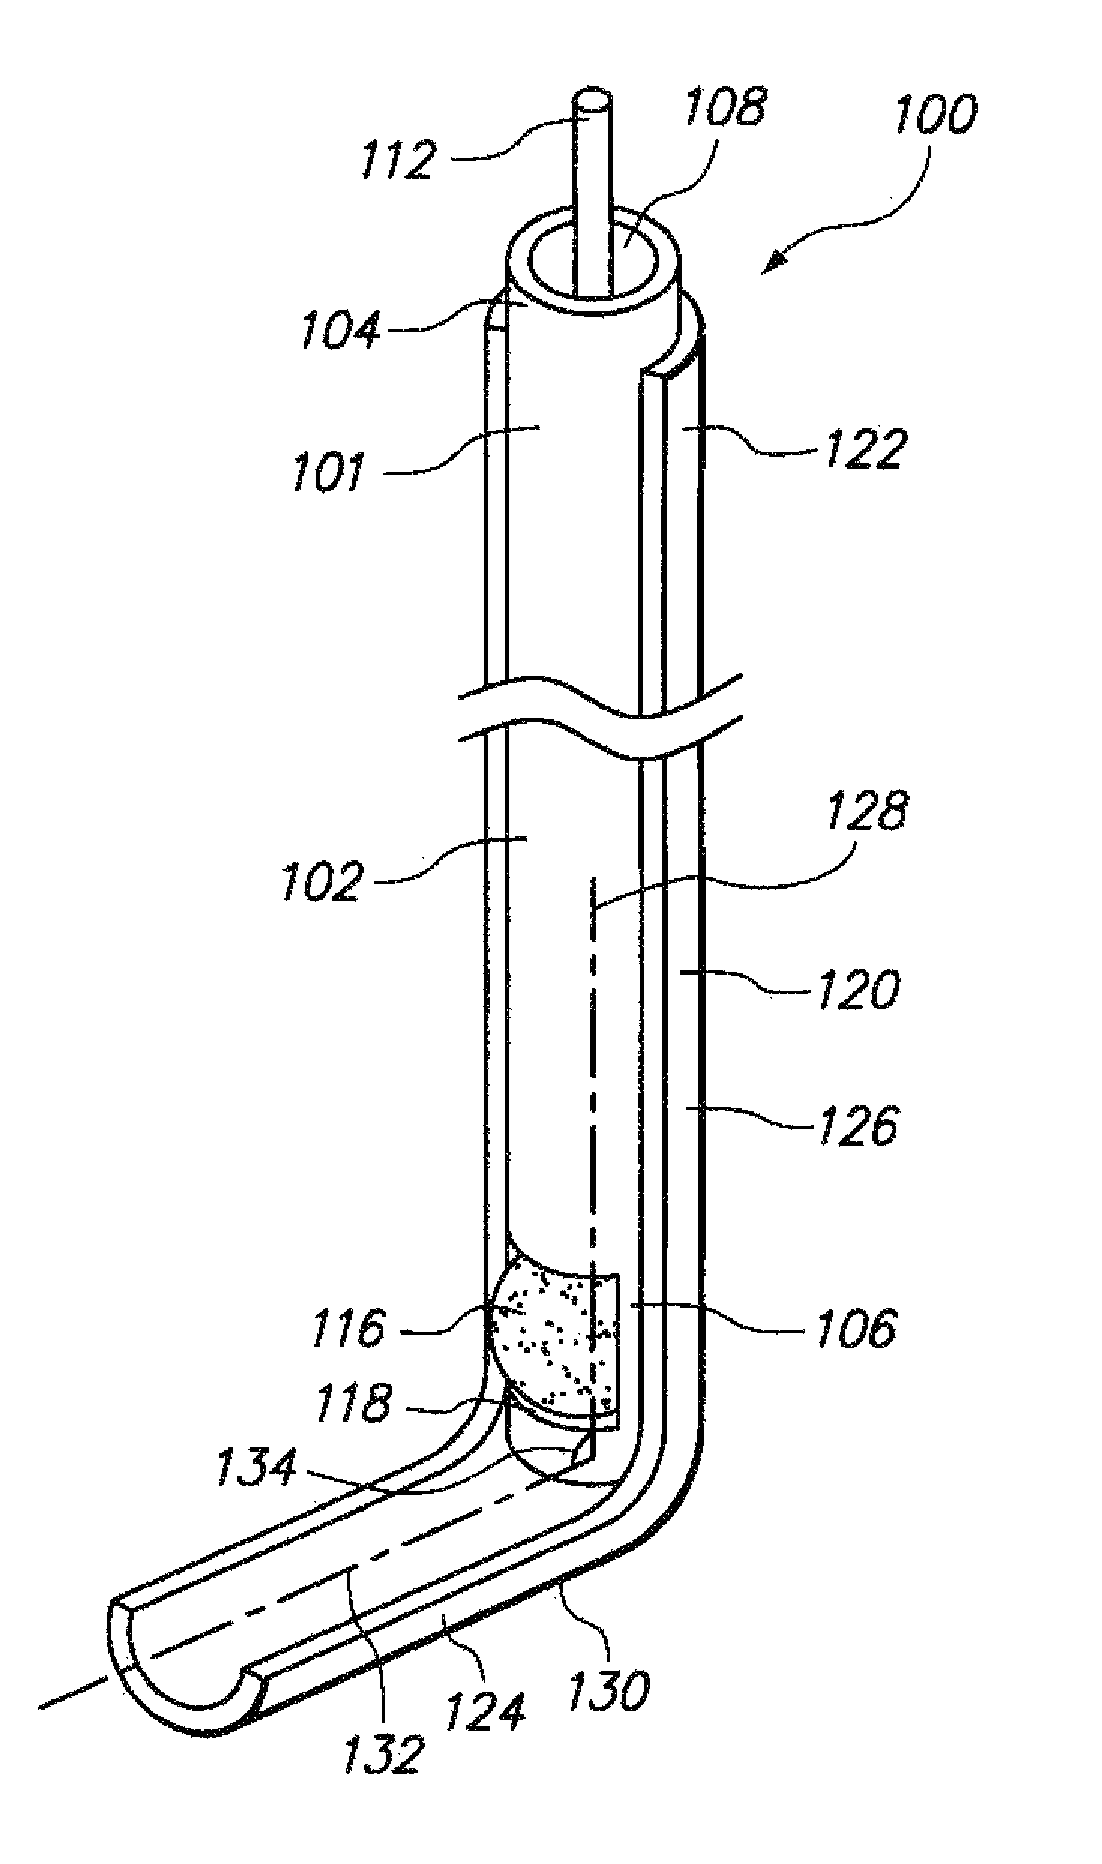 Slidable sheaths for tissue removal devices